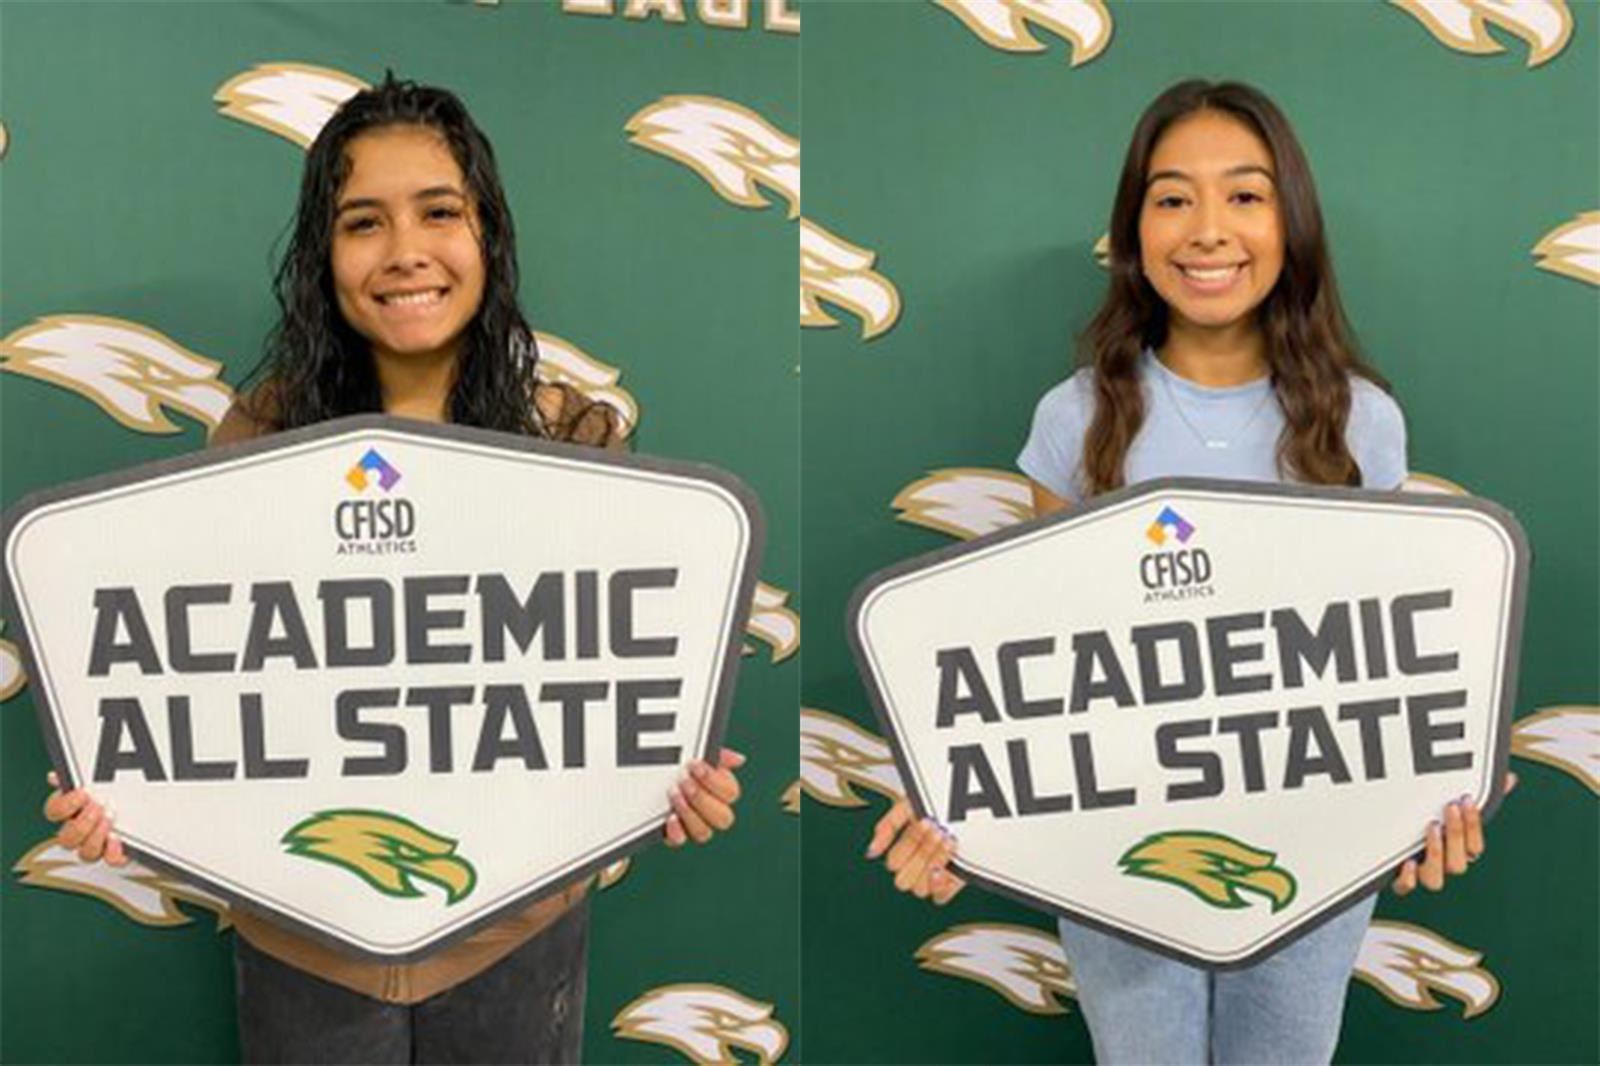 Cypress Falls seniors Jennifer Ortiz, left, and Briana Briones were among 45 CFISD student-athletes named academic all-state.